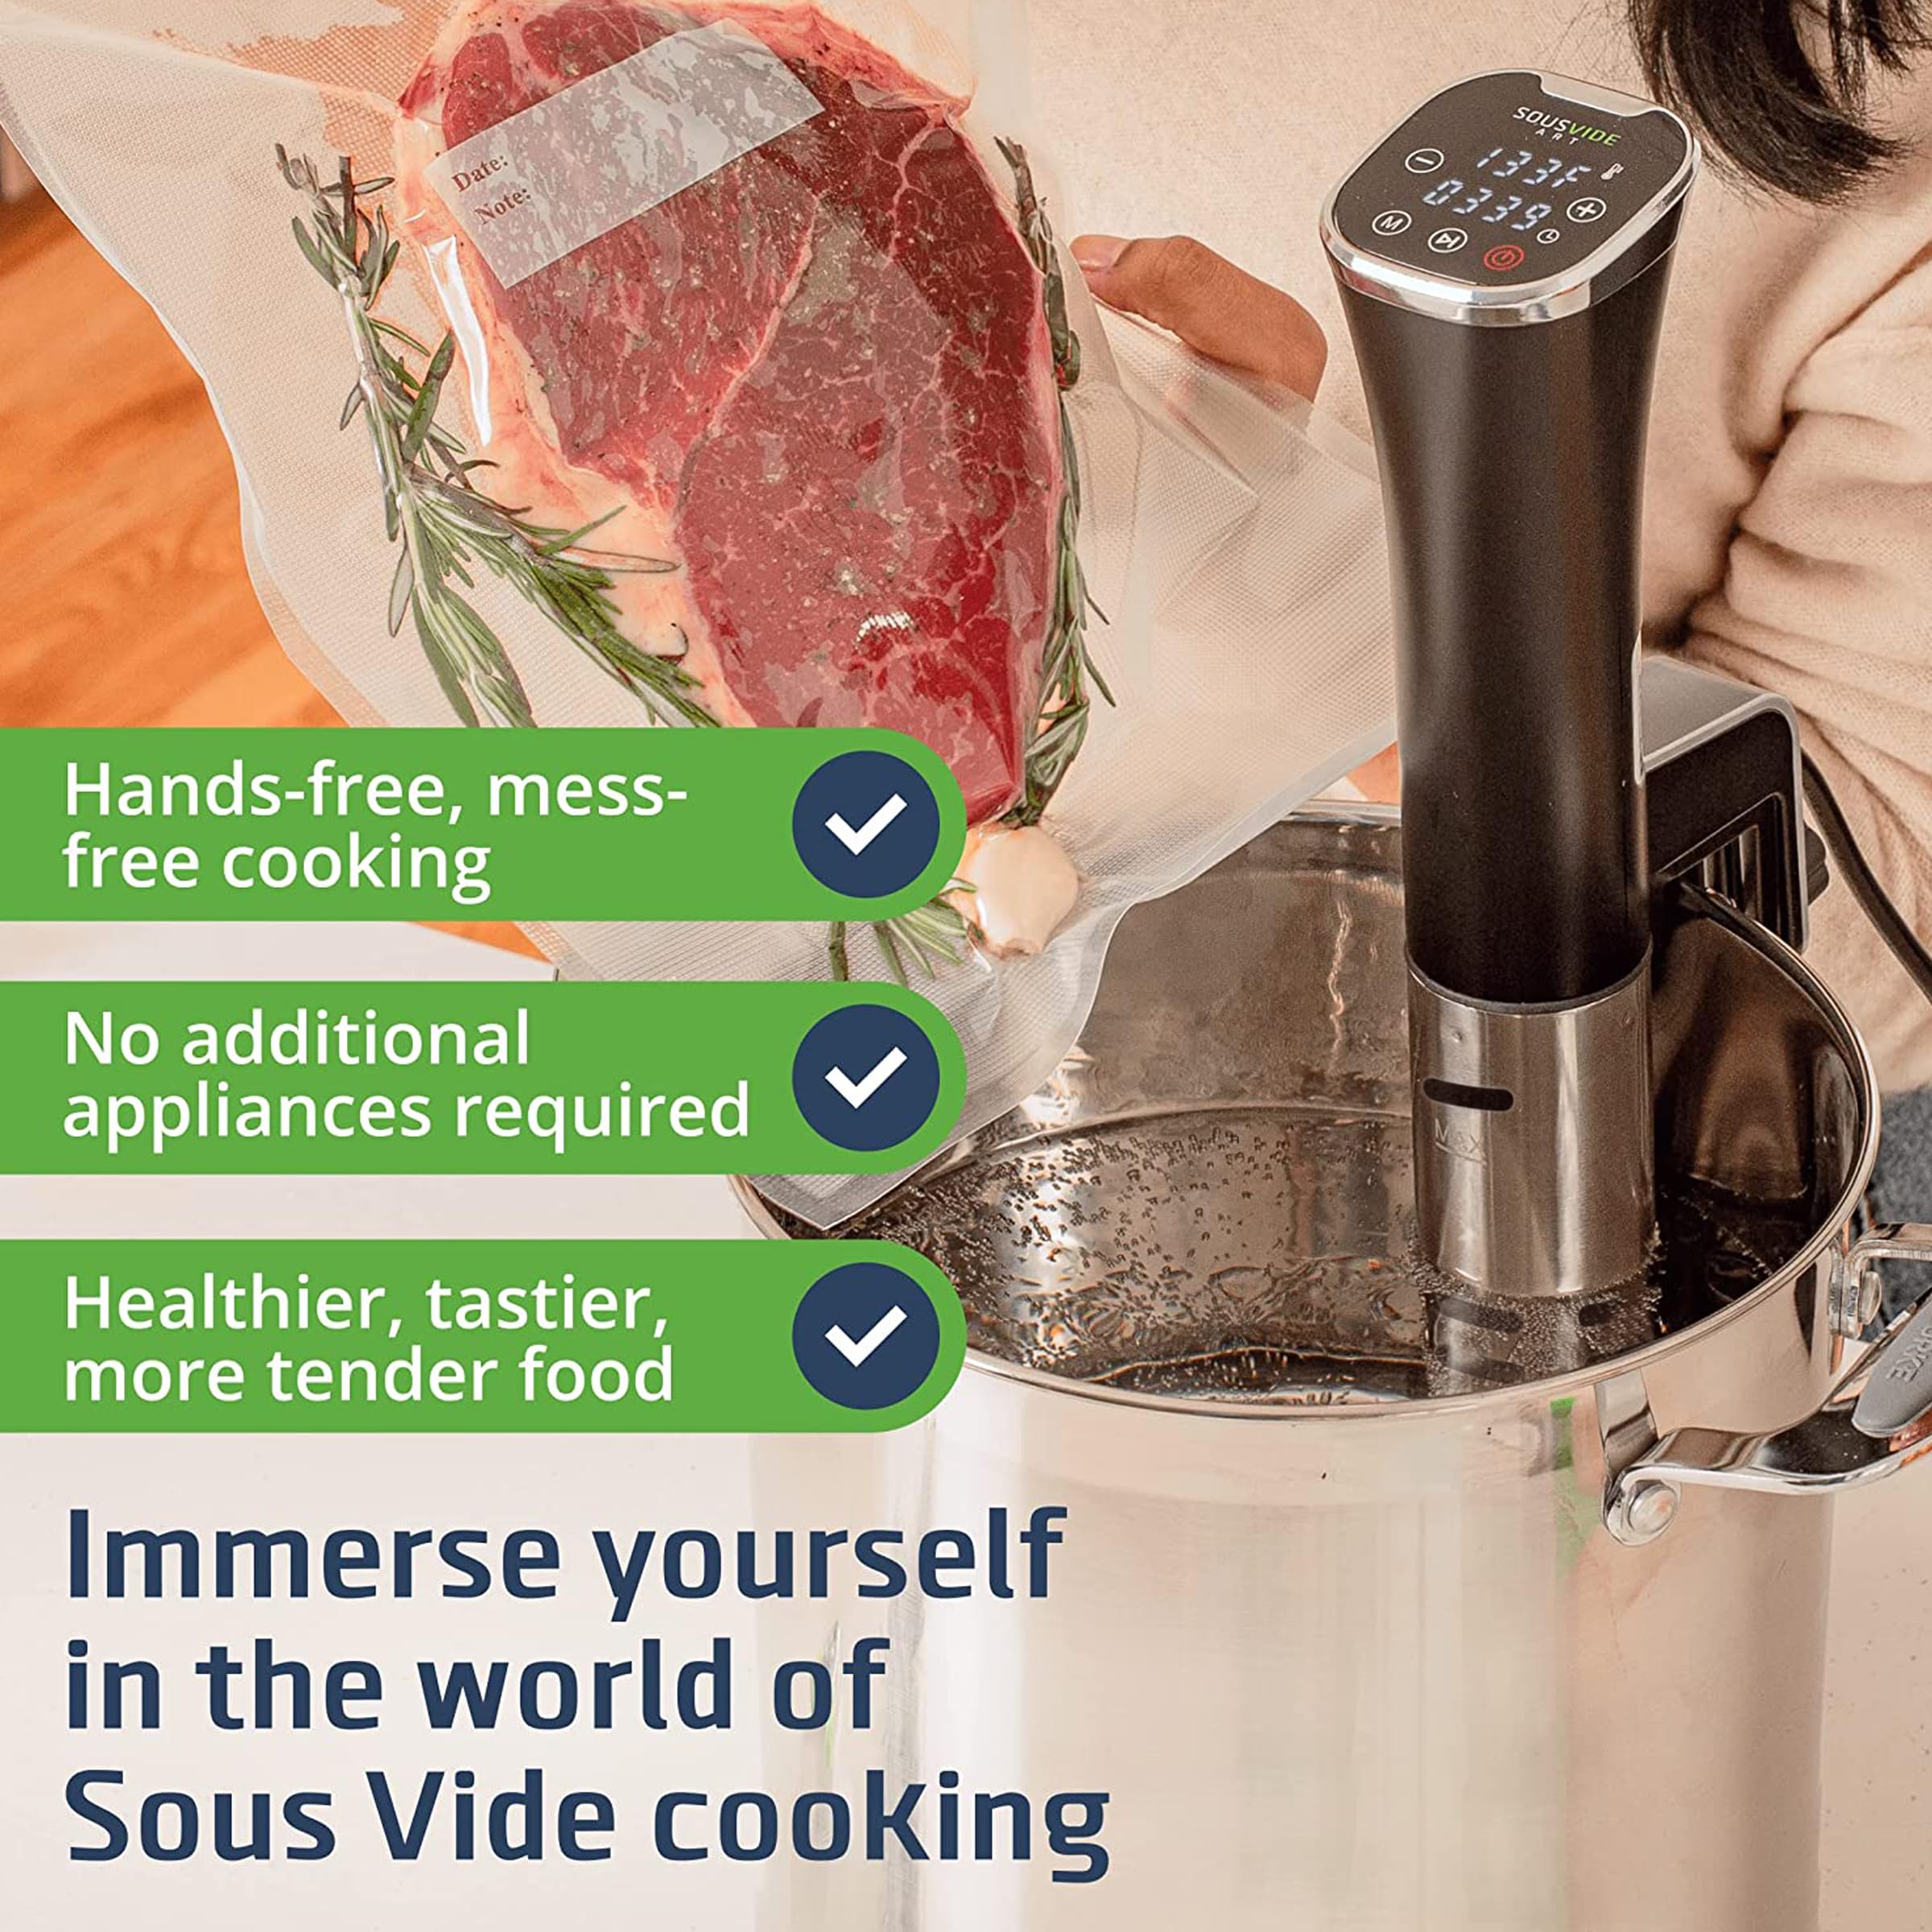 SOUSVIDE ART Sous Vide Immersion Cooker Kit - Machine with Digital Timer, Temp Control, 30 Bags, Vacuum Pump, Suvee Cooker Gift for Chefs  - Good